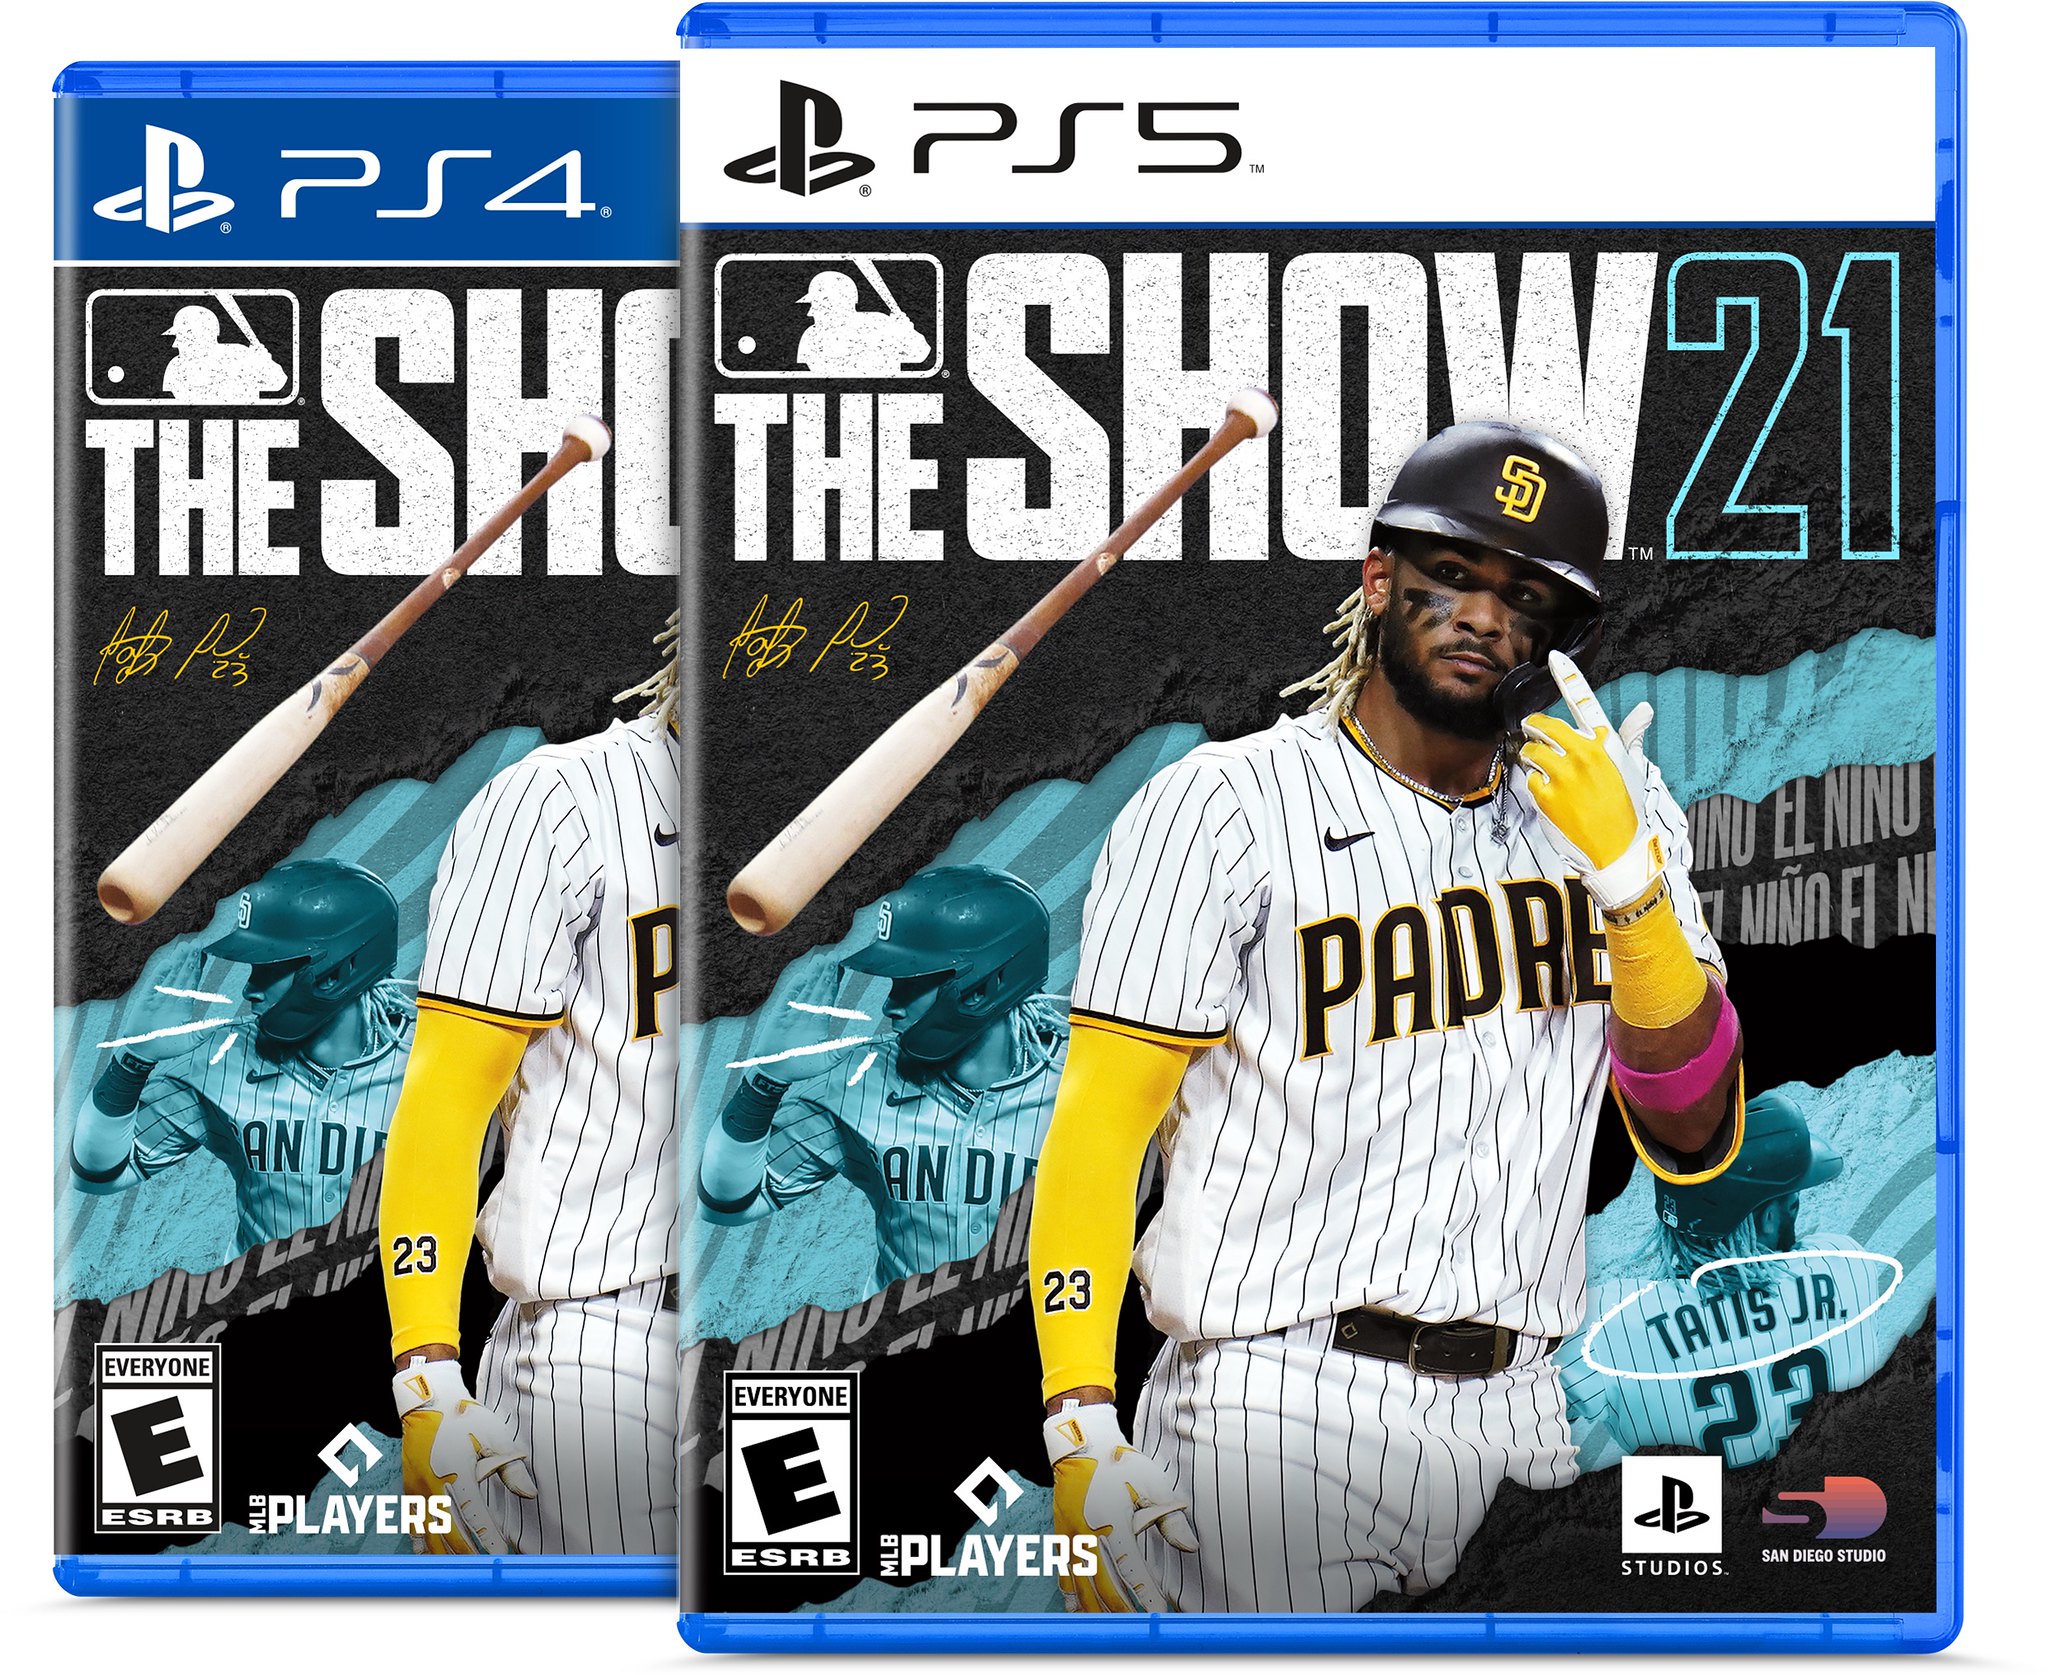 MLB The Show 21 releases in the Philippines on April 20 for PS5 and PS4